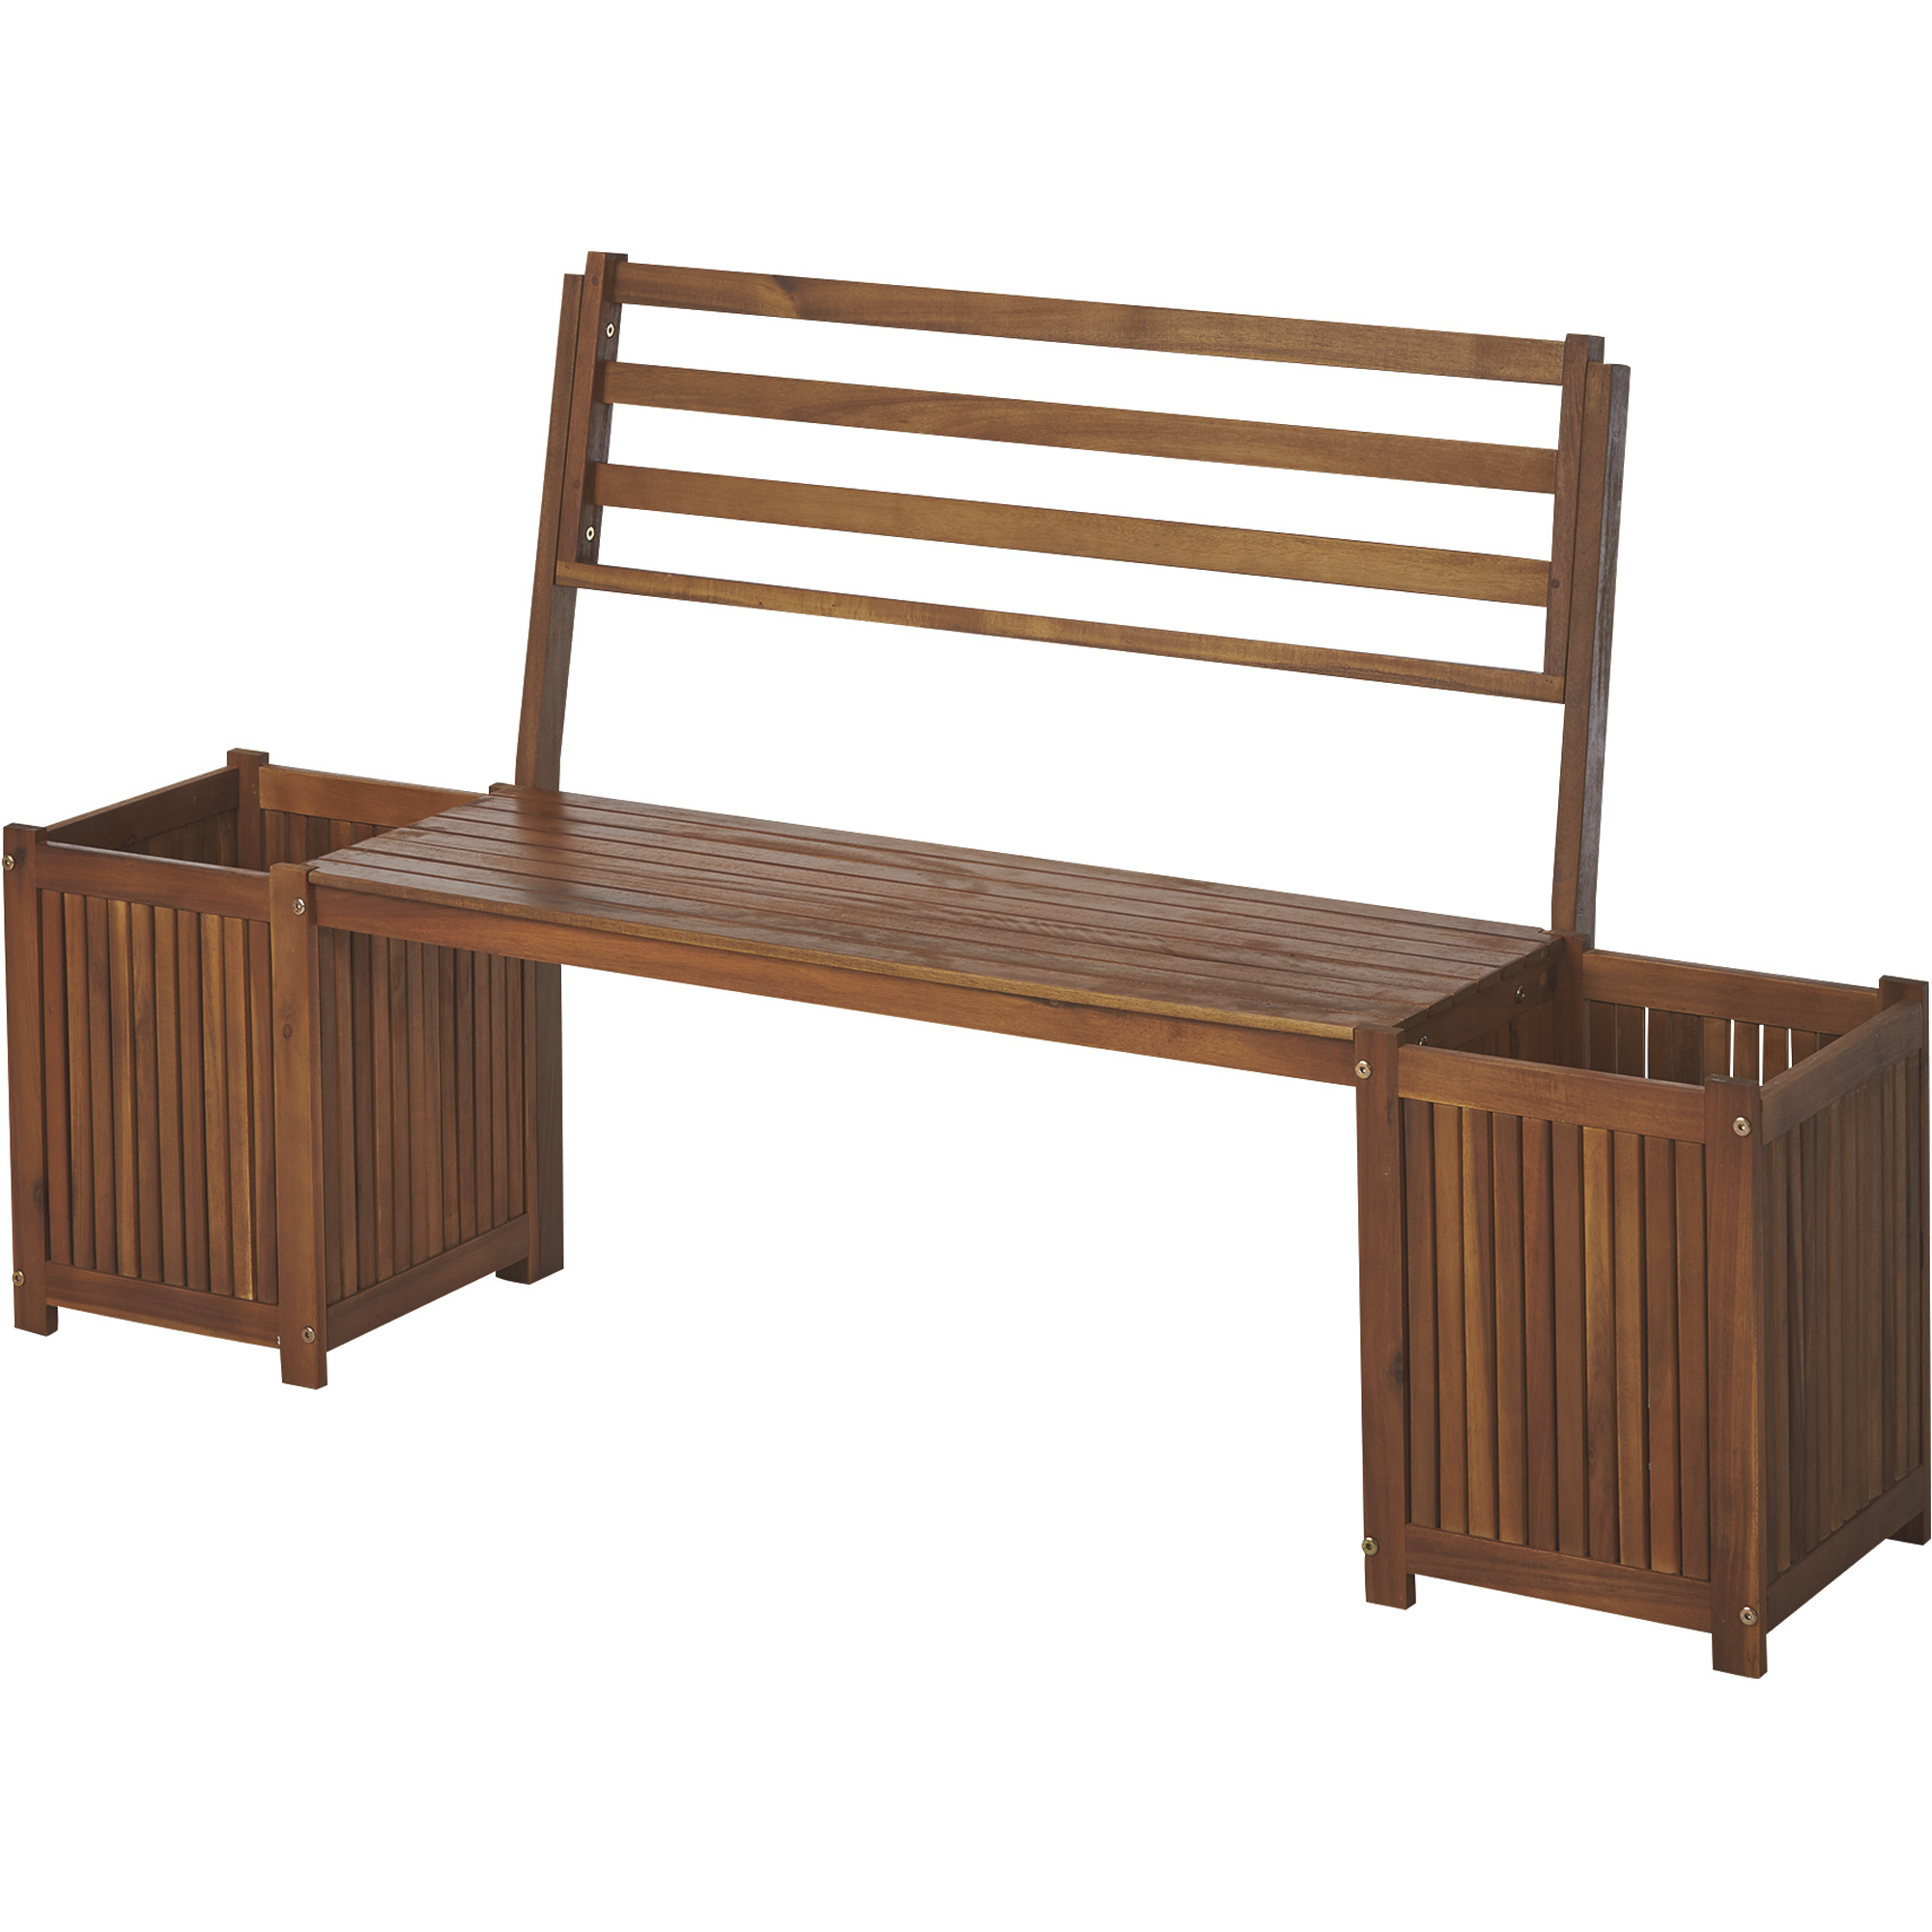 Leigh Country Acacia Wood Planter Park Bench with Backrest â Natural, Model TX36456